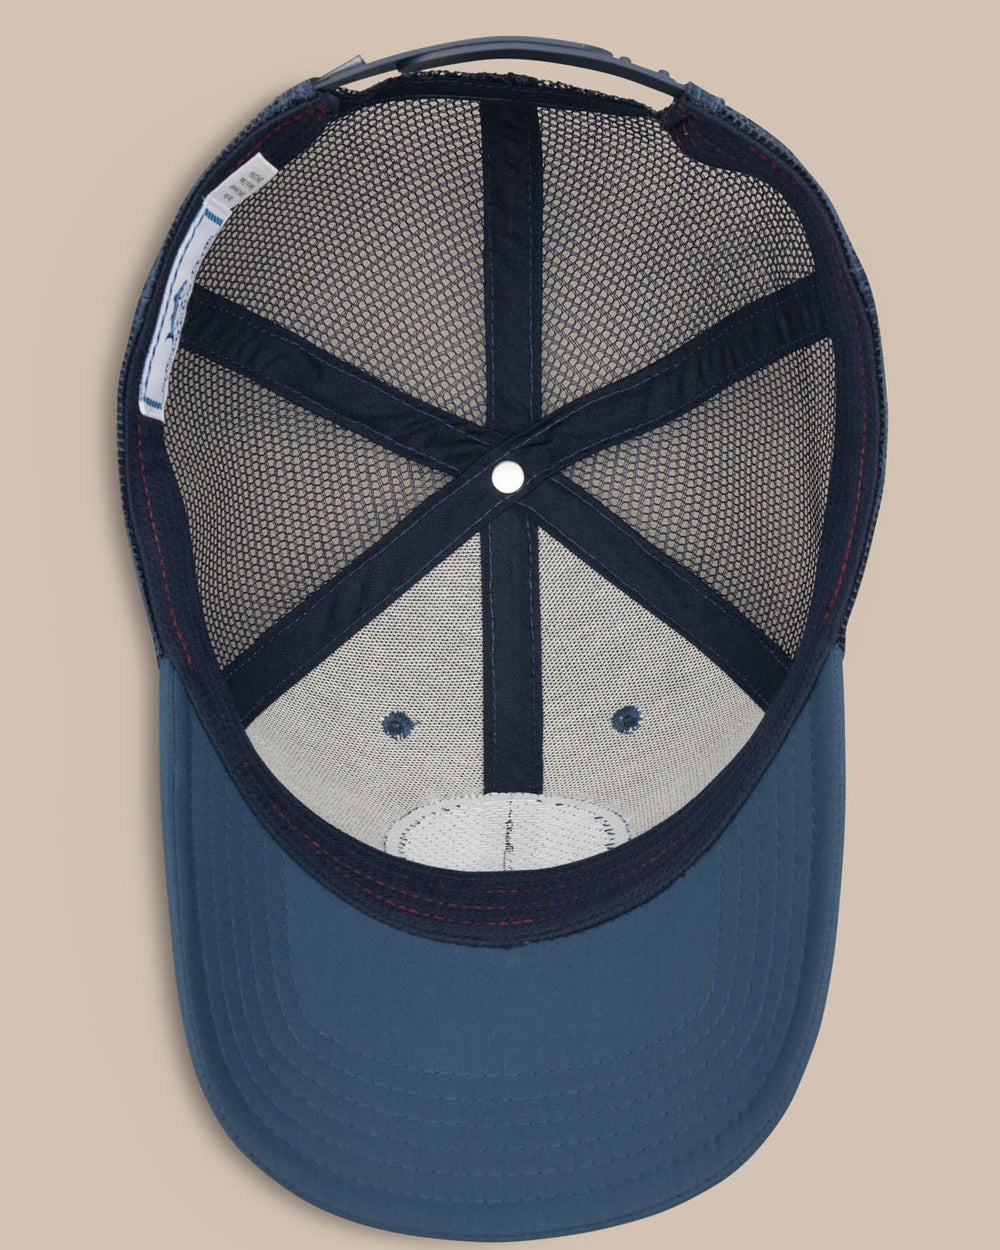 The below view of the Men's Georgia Patch Performance Trucker Hat by Southern Tide - Seven Seas Blue